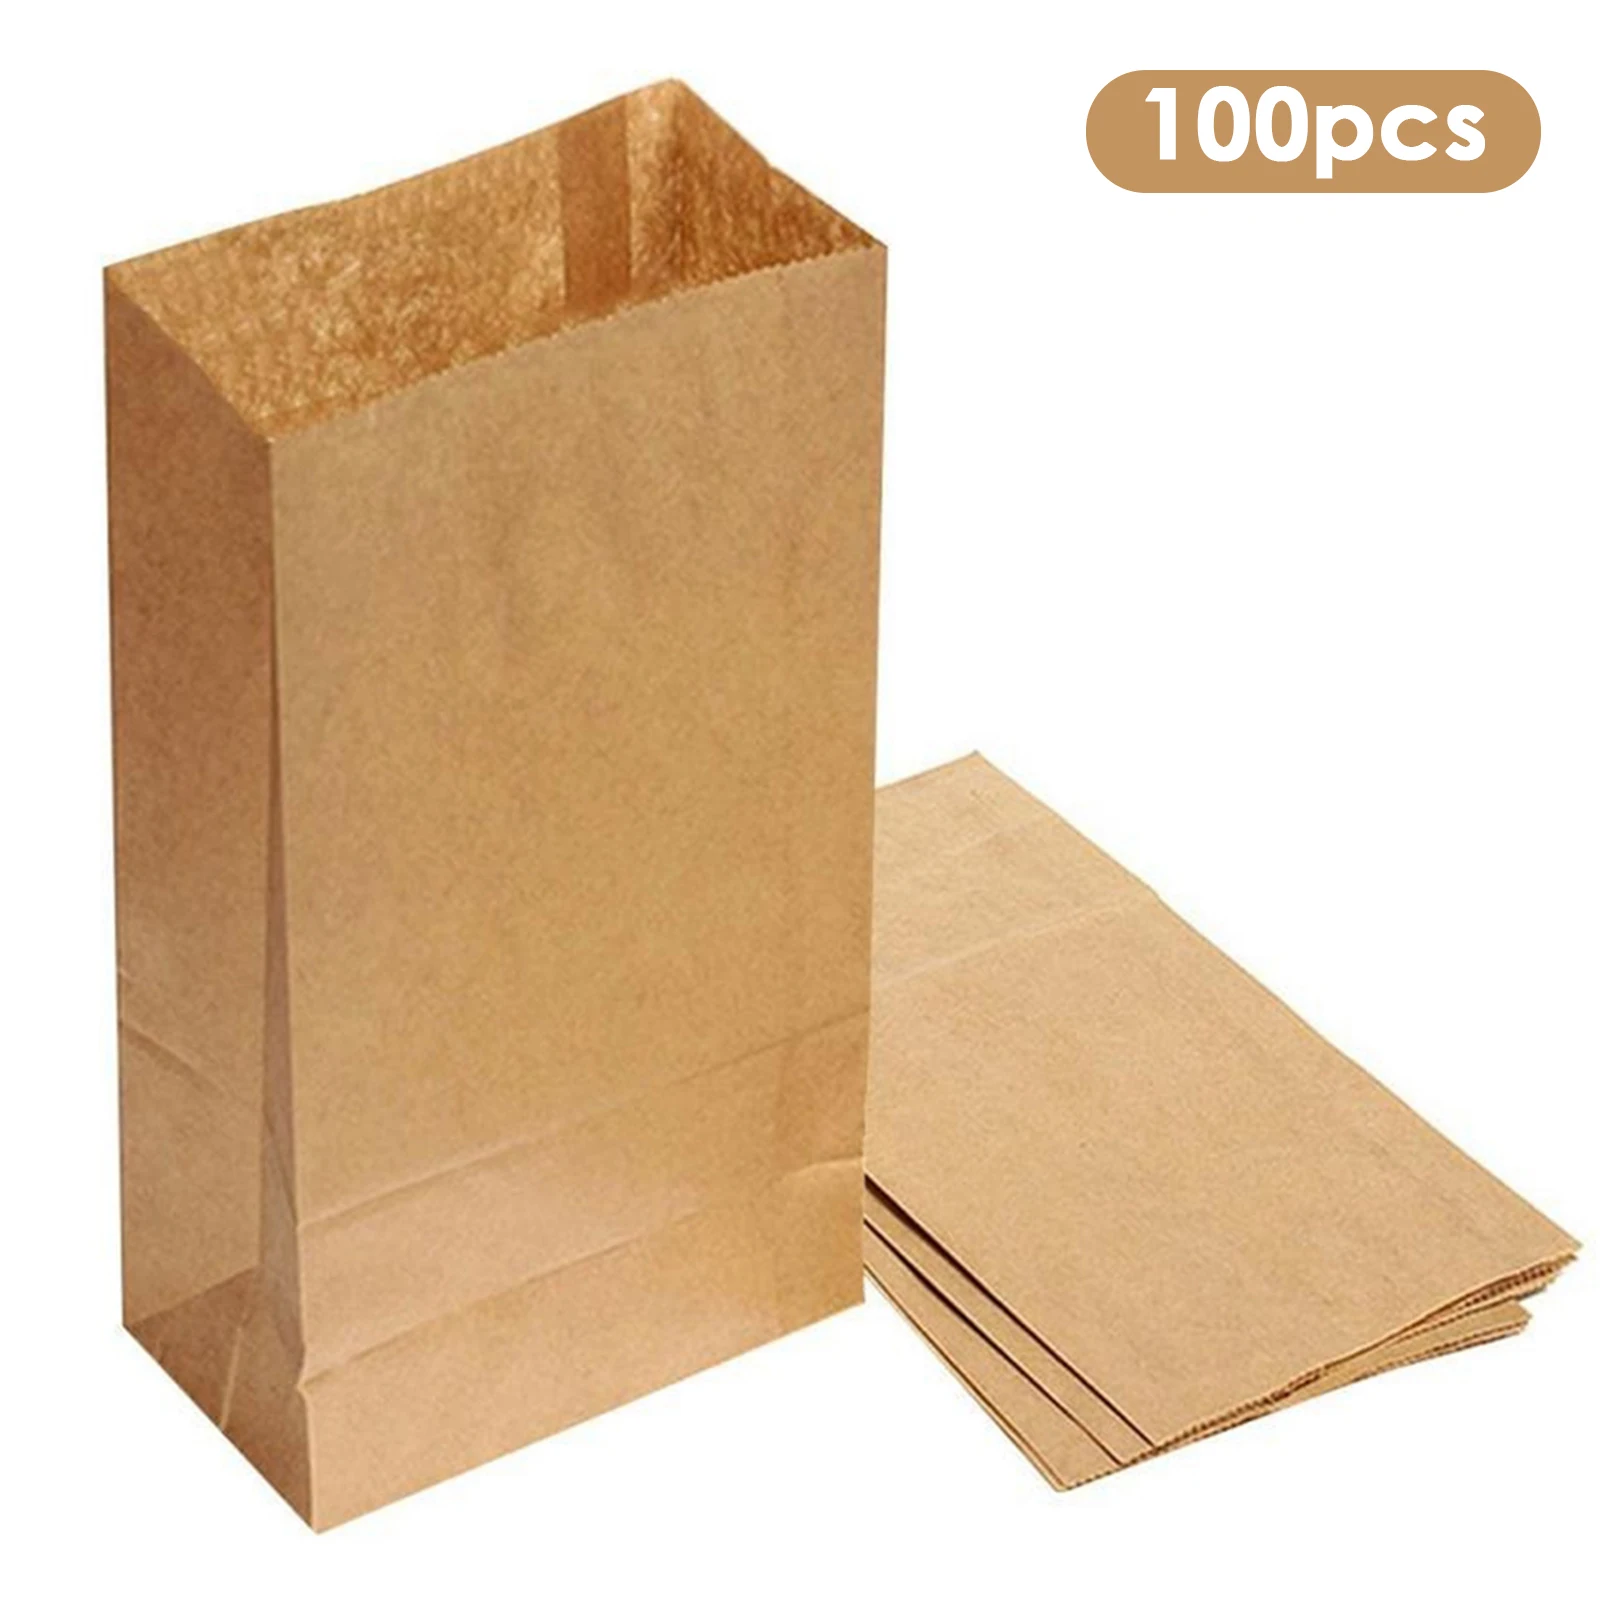 

100Pcs Brown Paper Bag Kraft Gift Packing Biscuits Candy Food Cookie Nuts Snack Baking Package For Birthday Parties Christmas